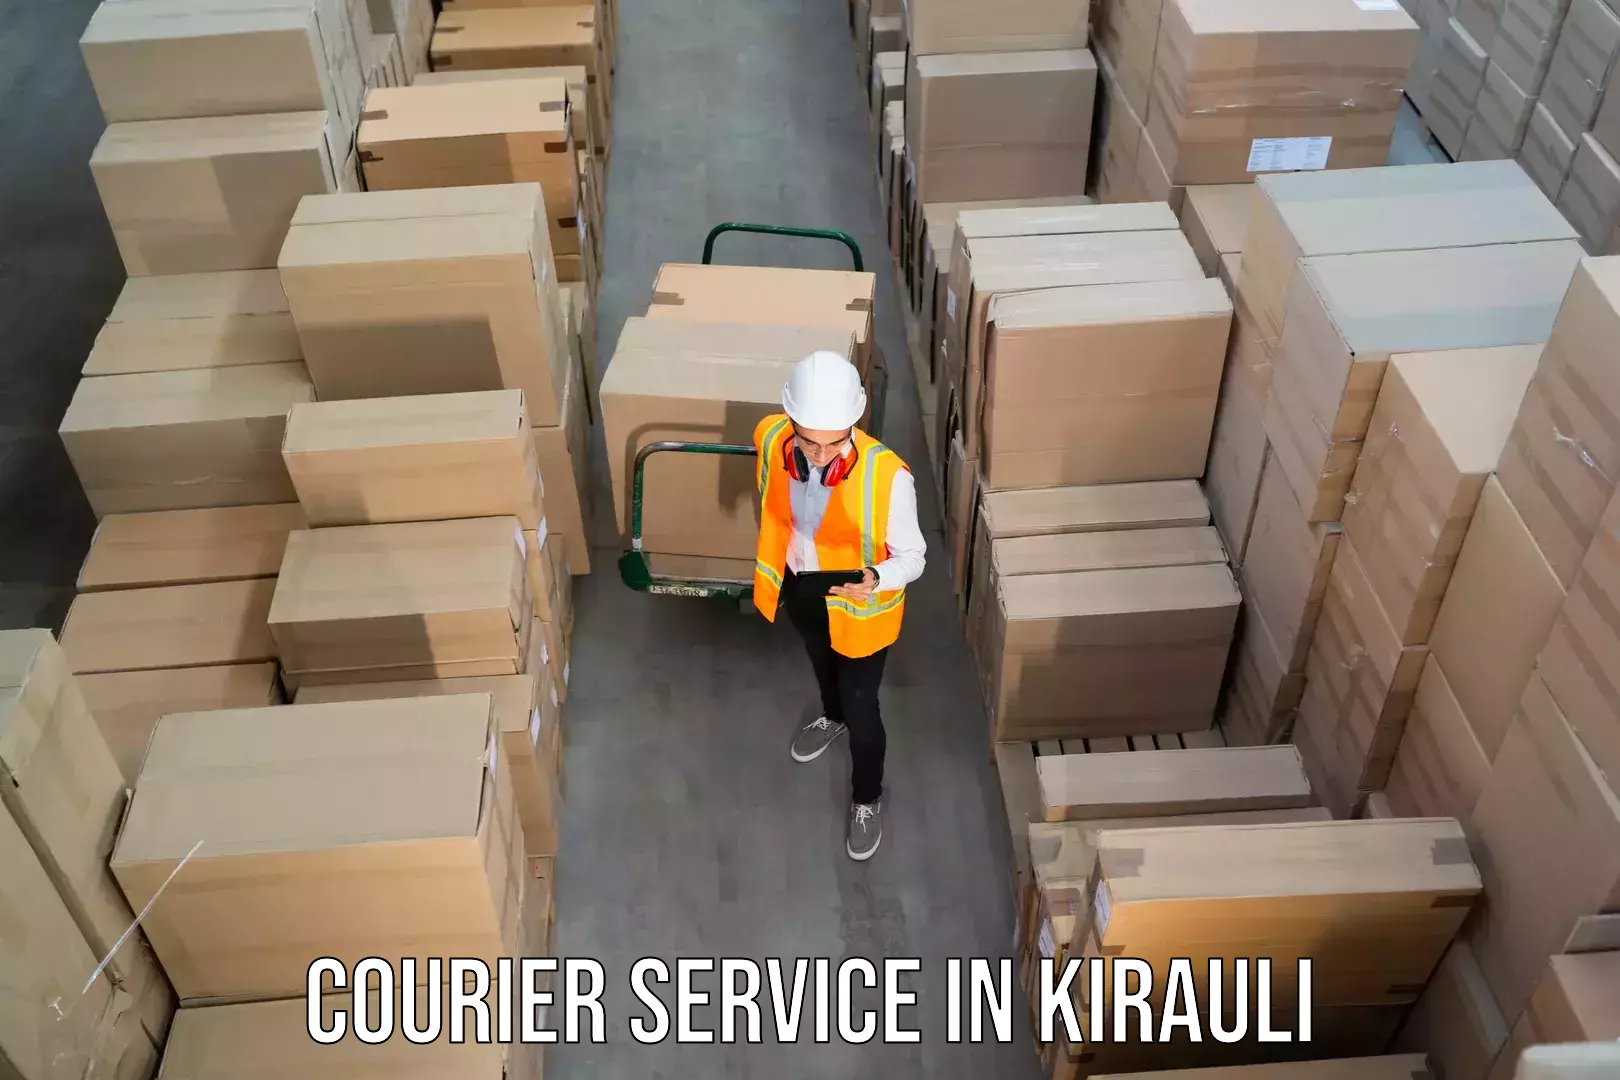 Same-day delivery solutions in Kirauli